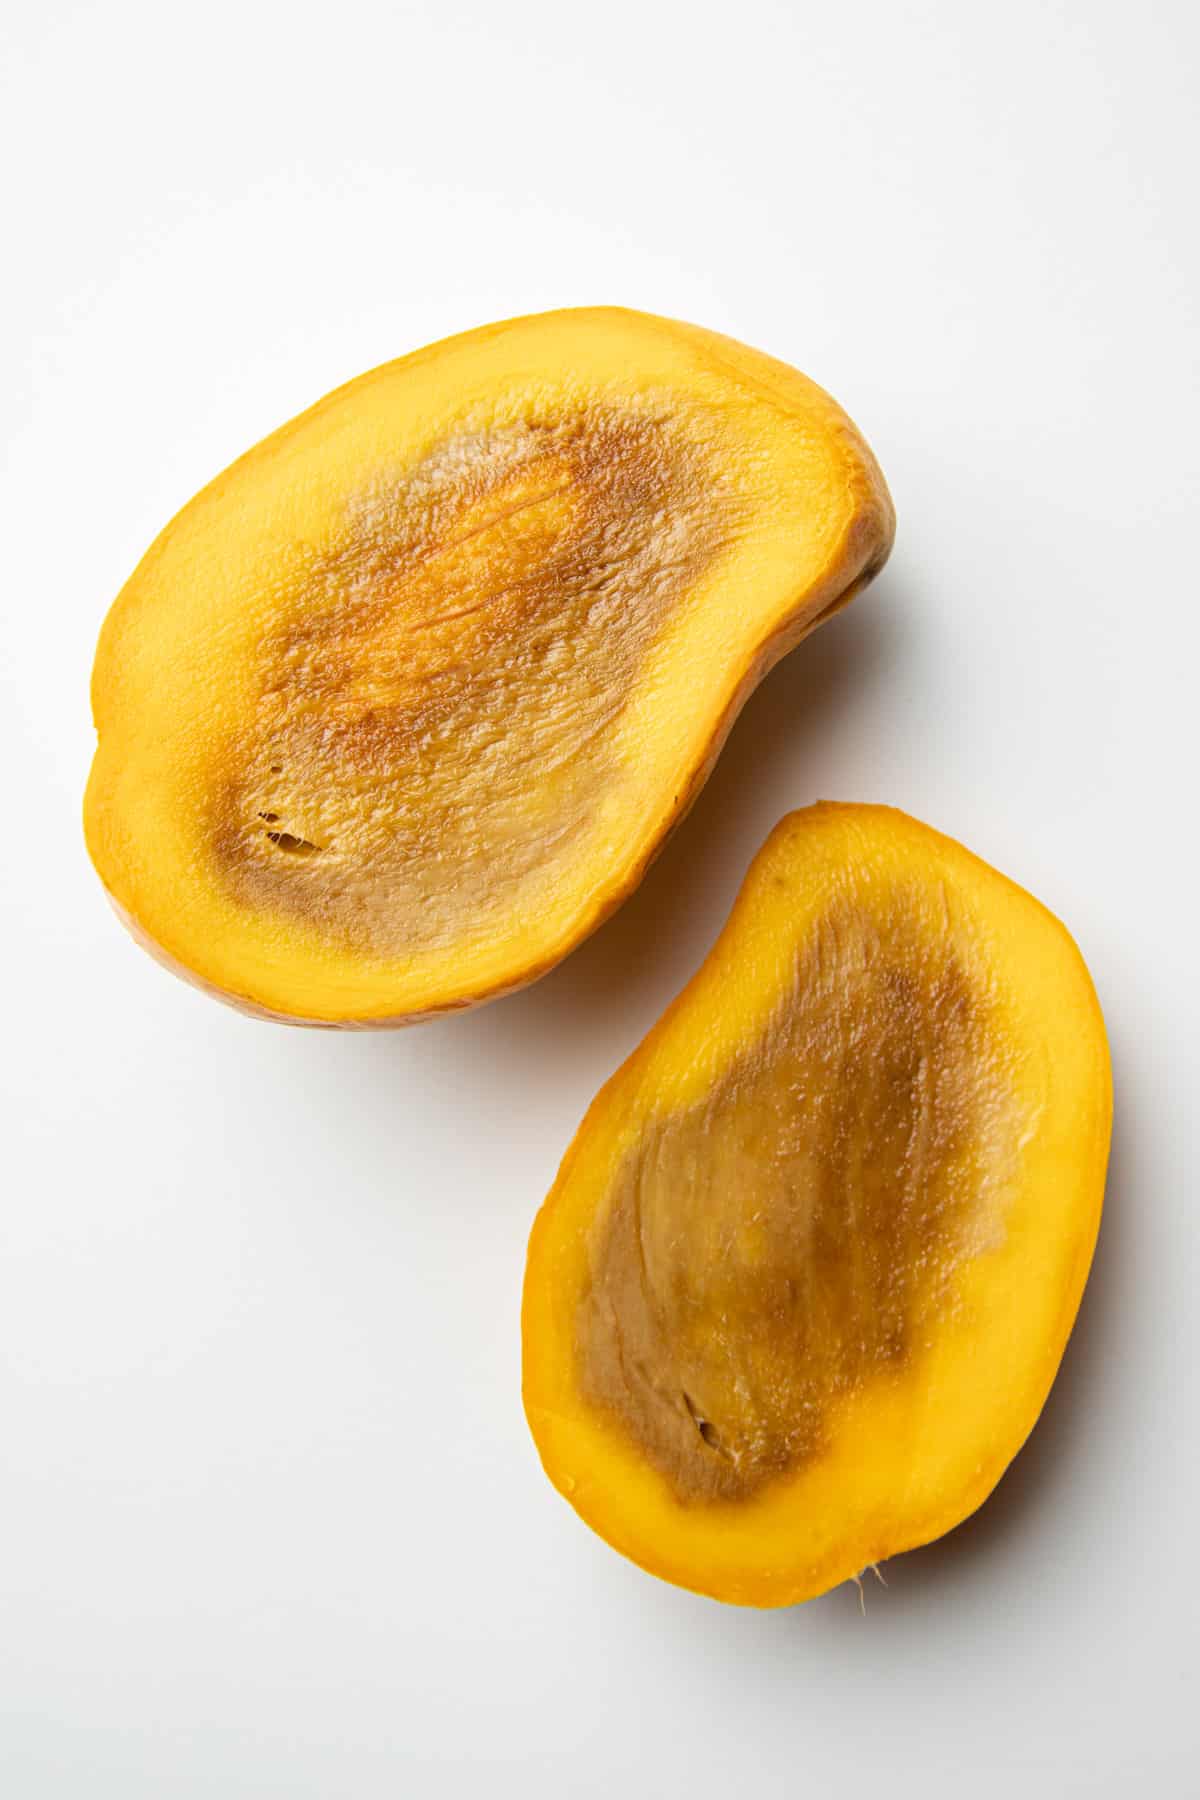 Mango sliced open with browning on the inside.